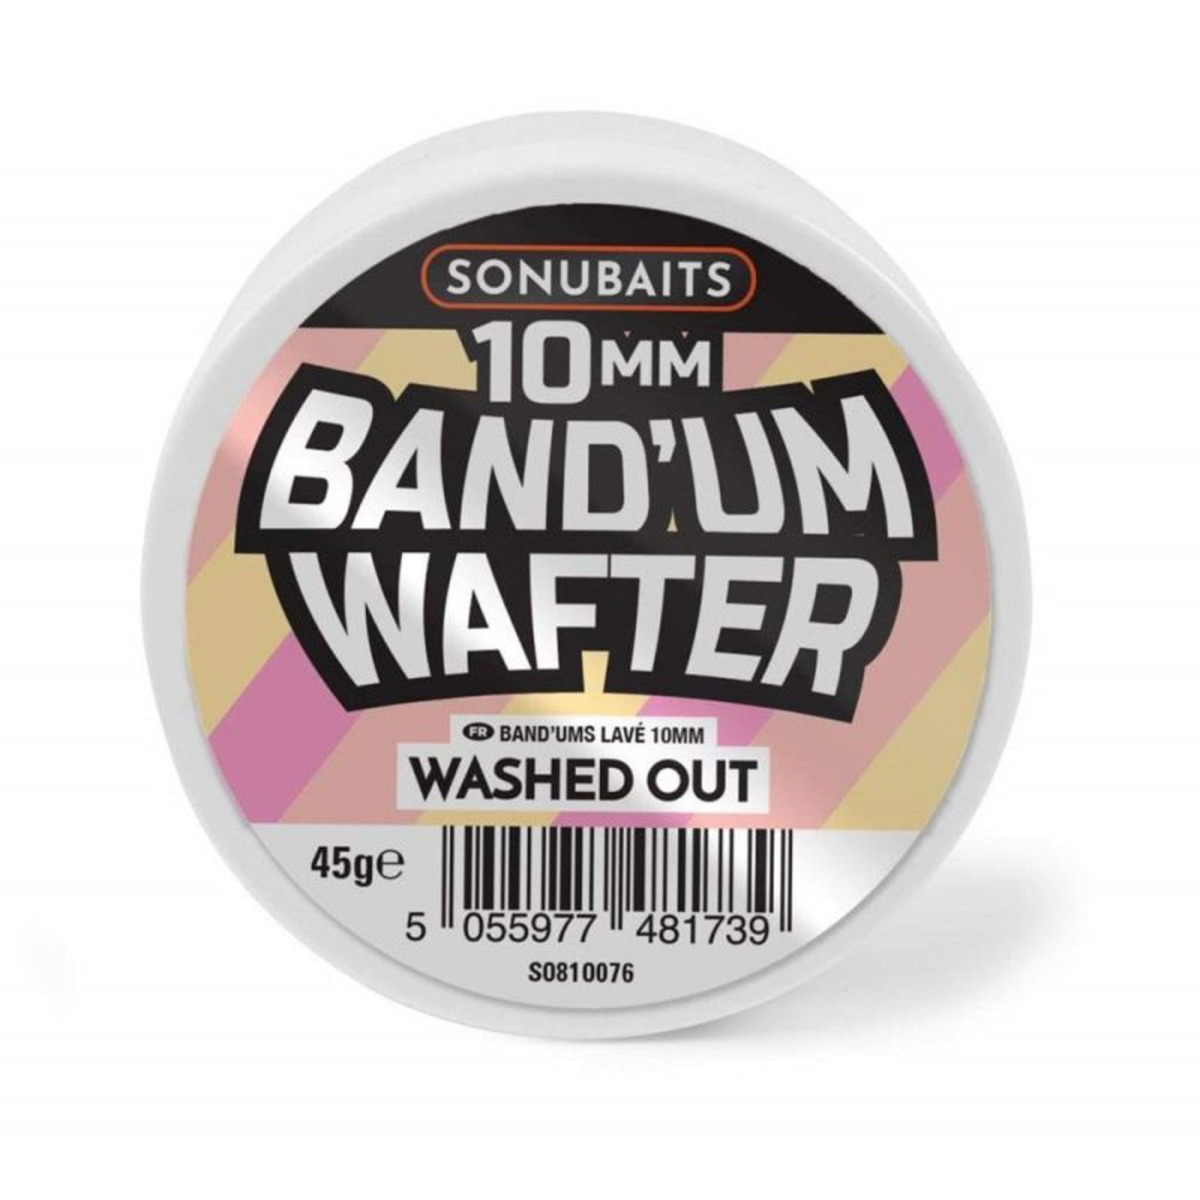 Sonubaits Band’um Wafters - 10 mm - Washed Out